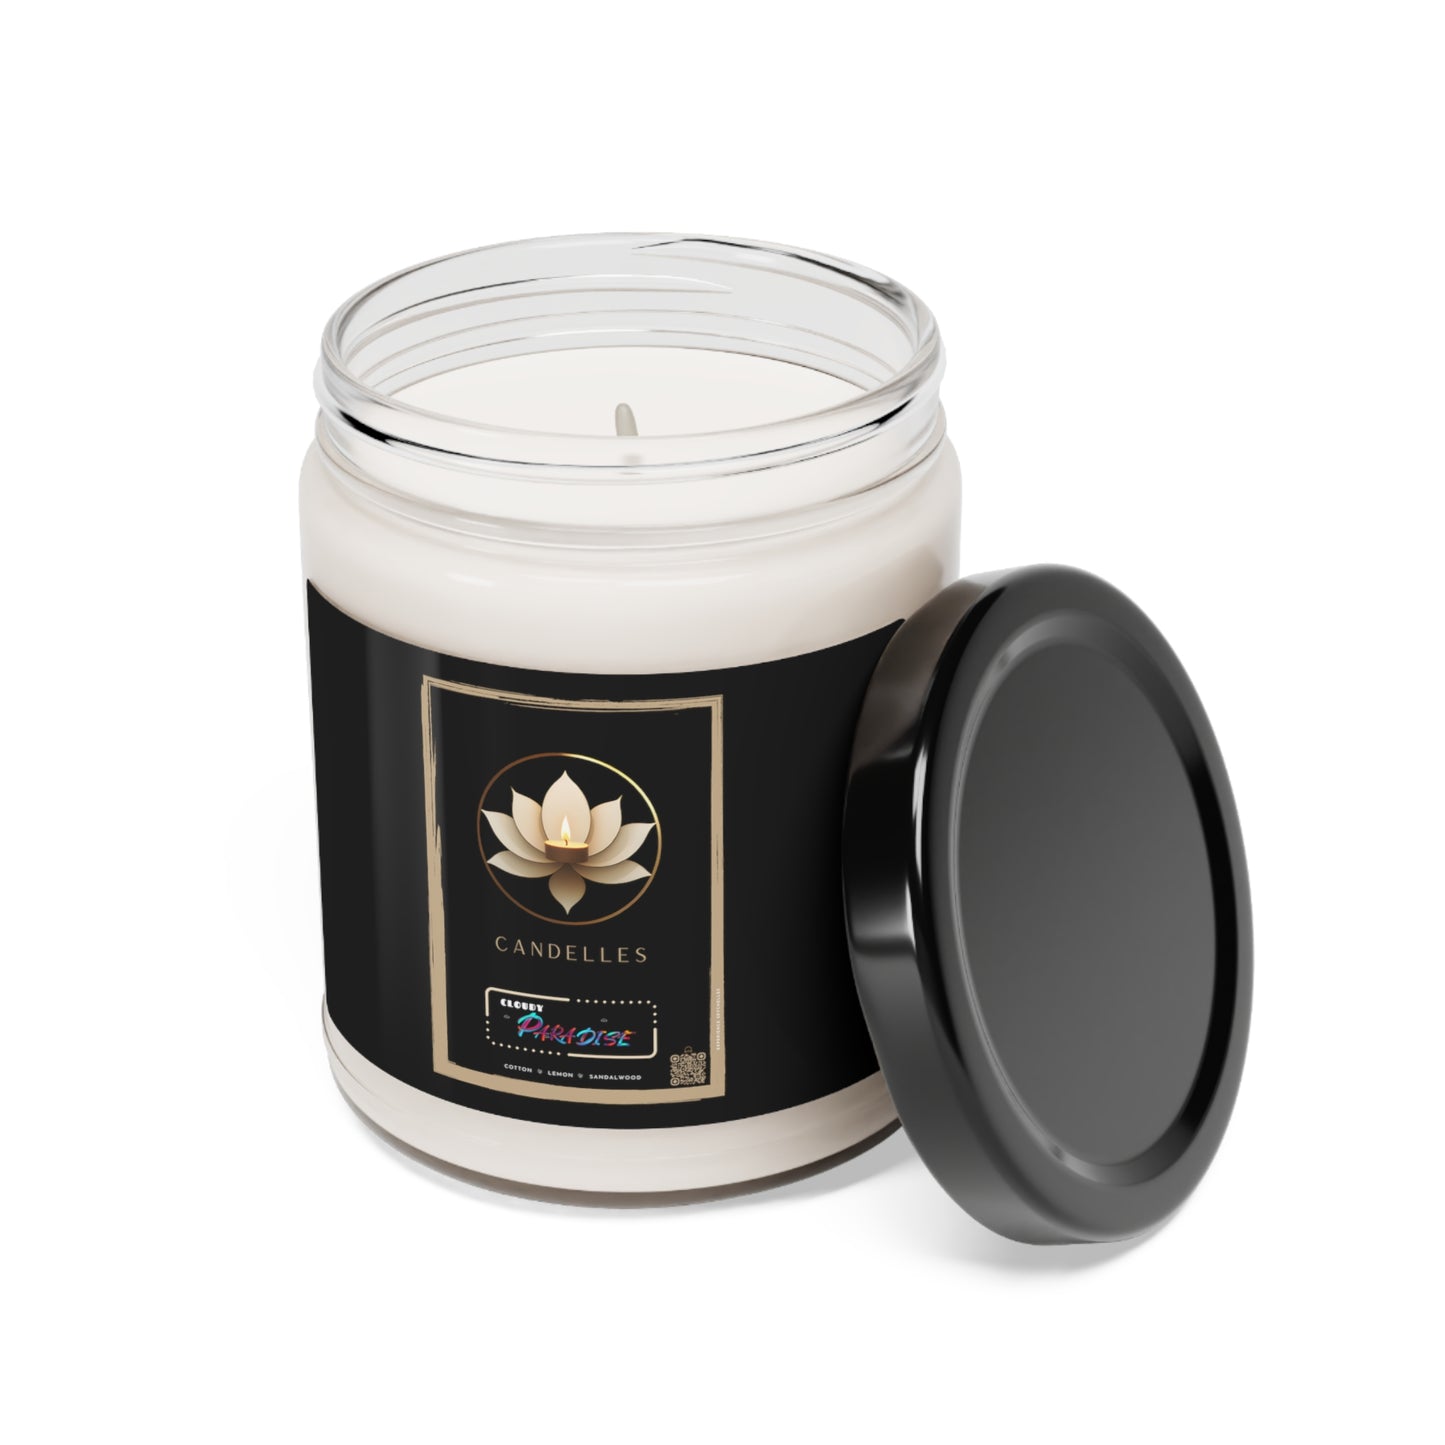 'Cloudy Paradise' by Candelles, Scented Soy Candle, 9oz